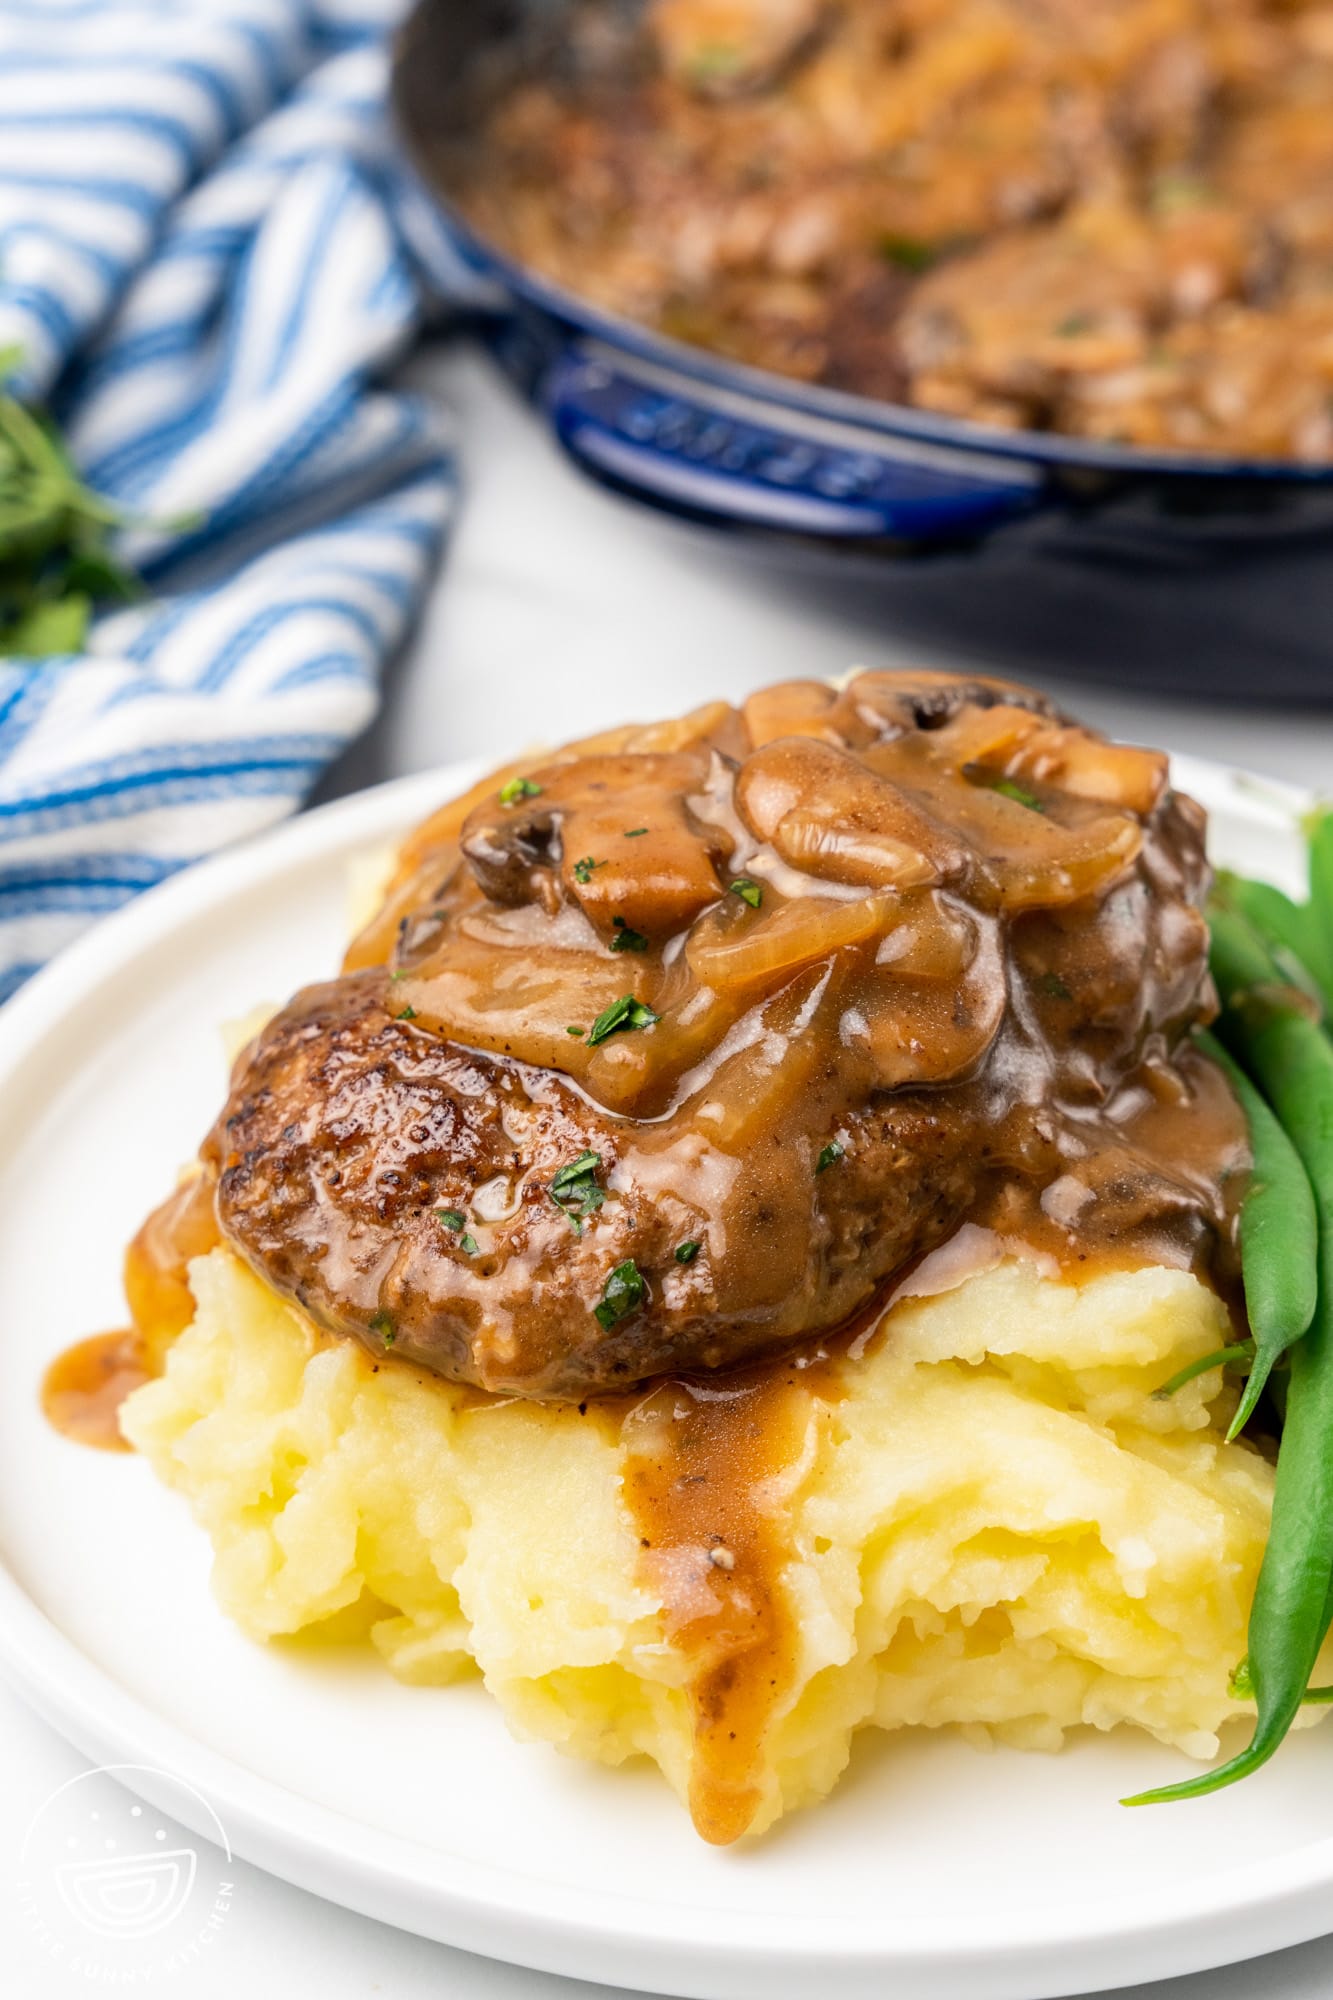 Hamburger steak sitting over mashed potatoes with mushroom gravy, and green beans on the side.